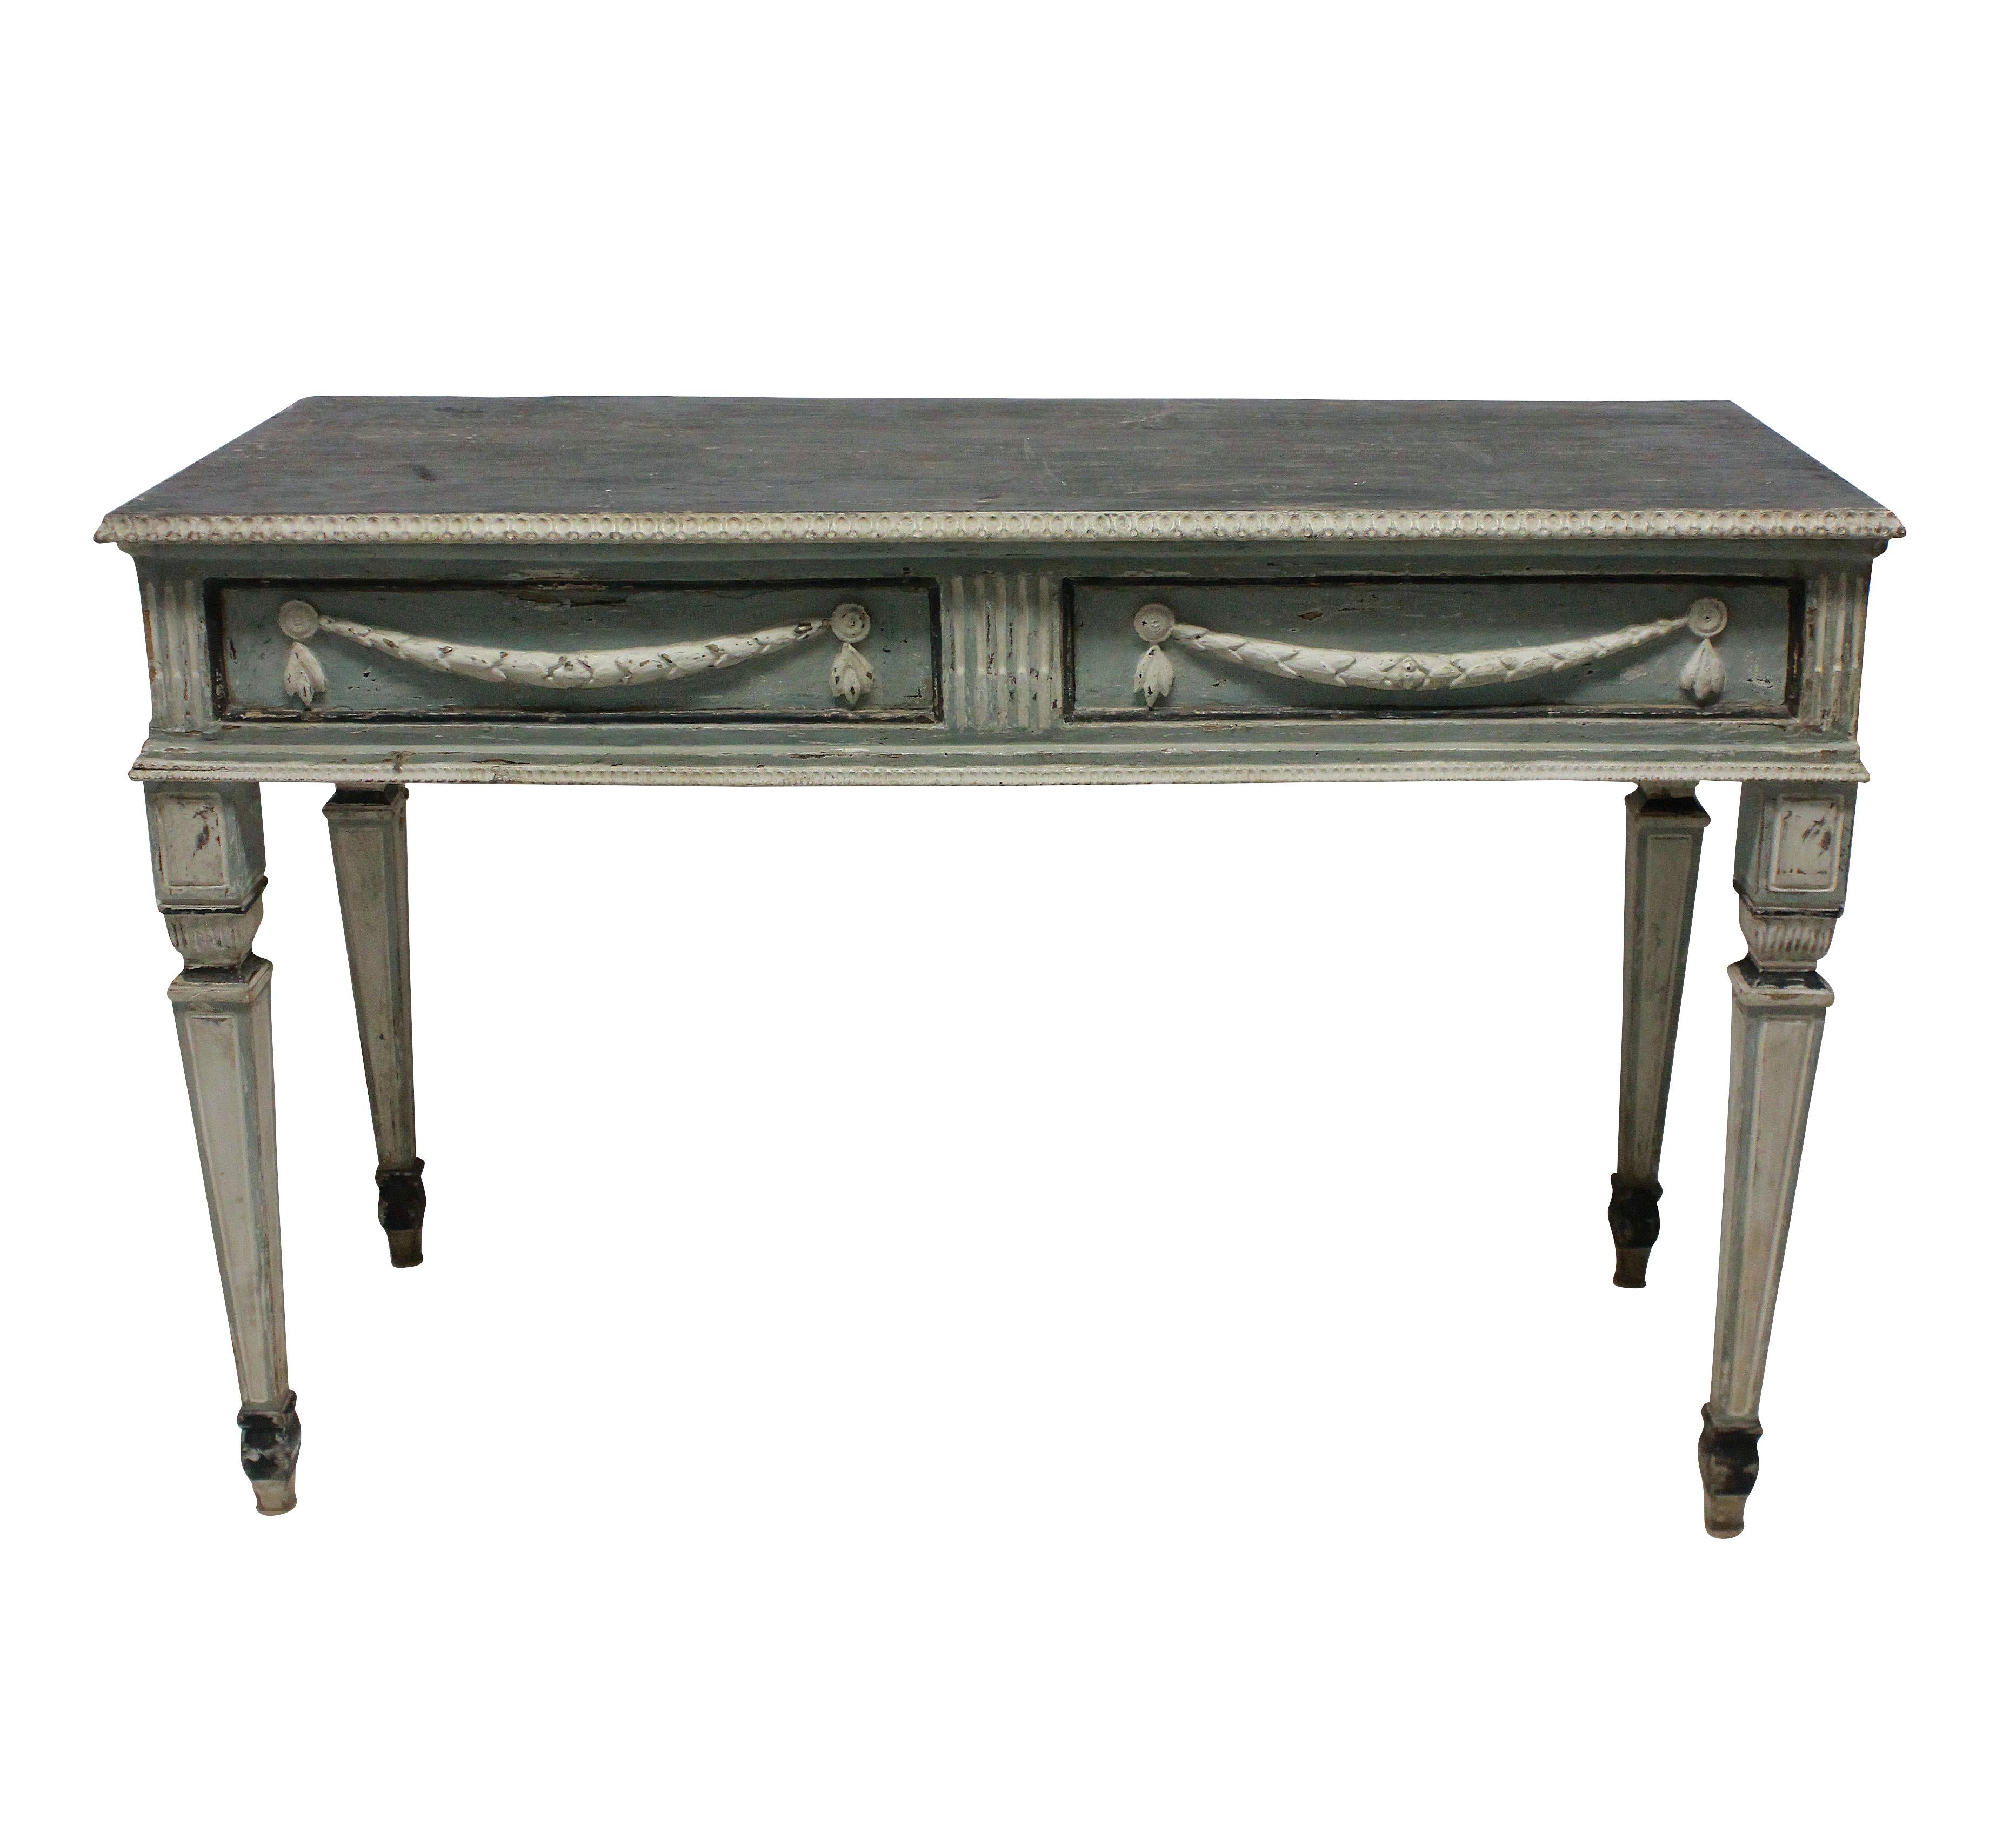 A pair of large scale Swedish 18th century console tables in the neoclassical taste. All of the paint is original and the colors are beautifully subtle in duck egg blues, soft white and charcoal.